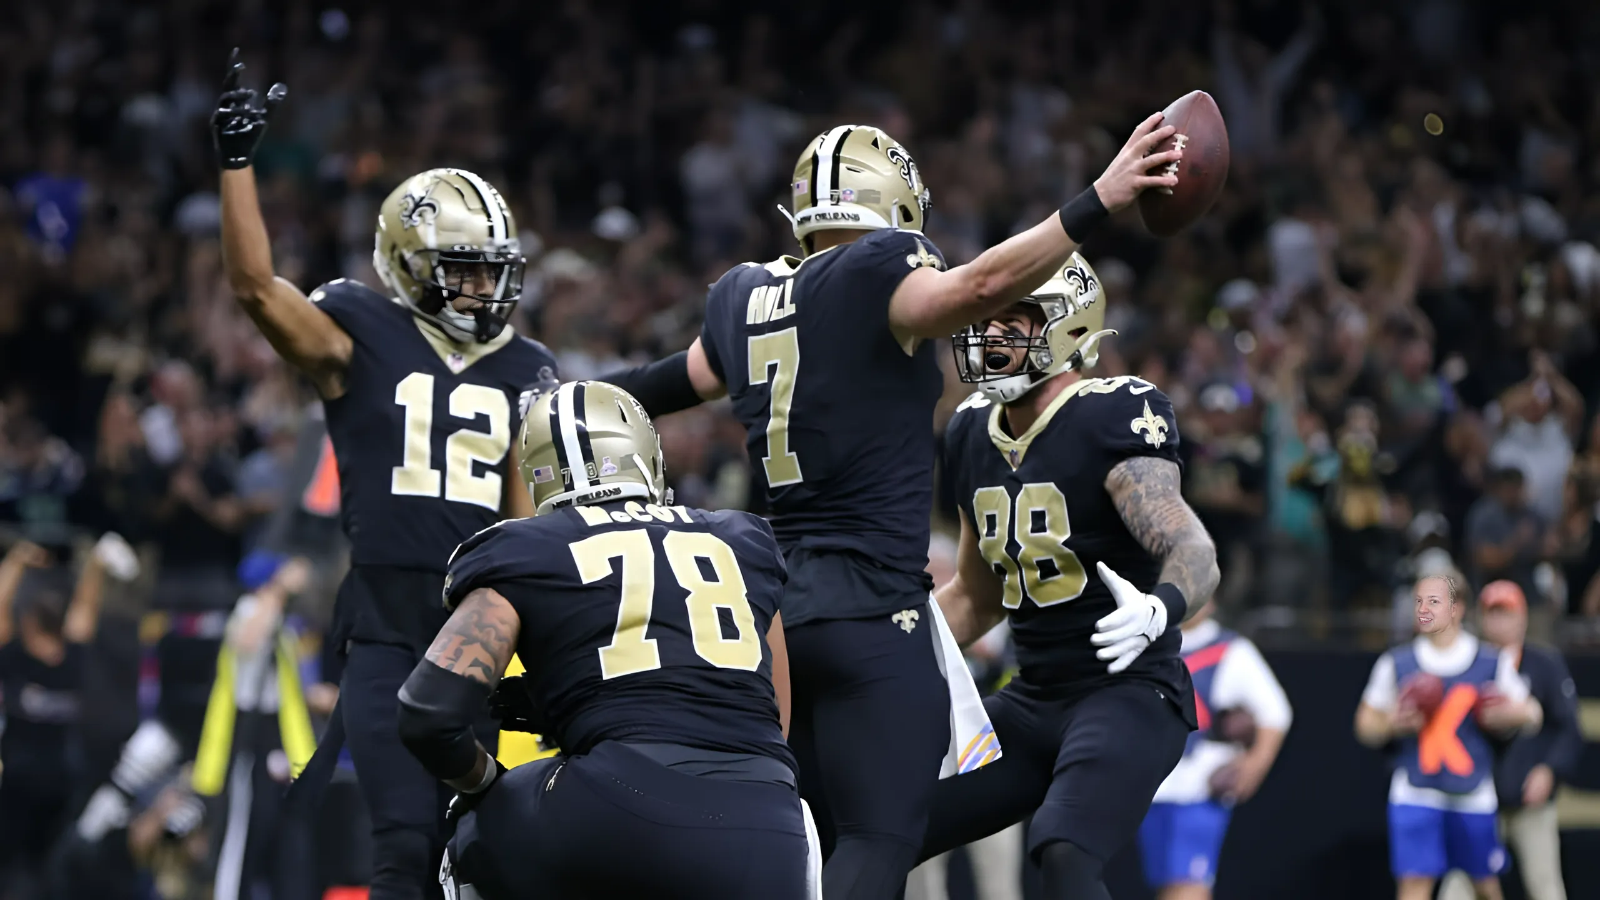 Saints Schedule Reportedly Coming On May 15 From the NFL